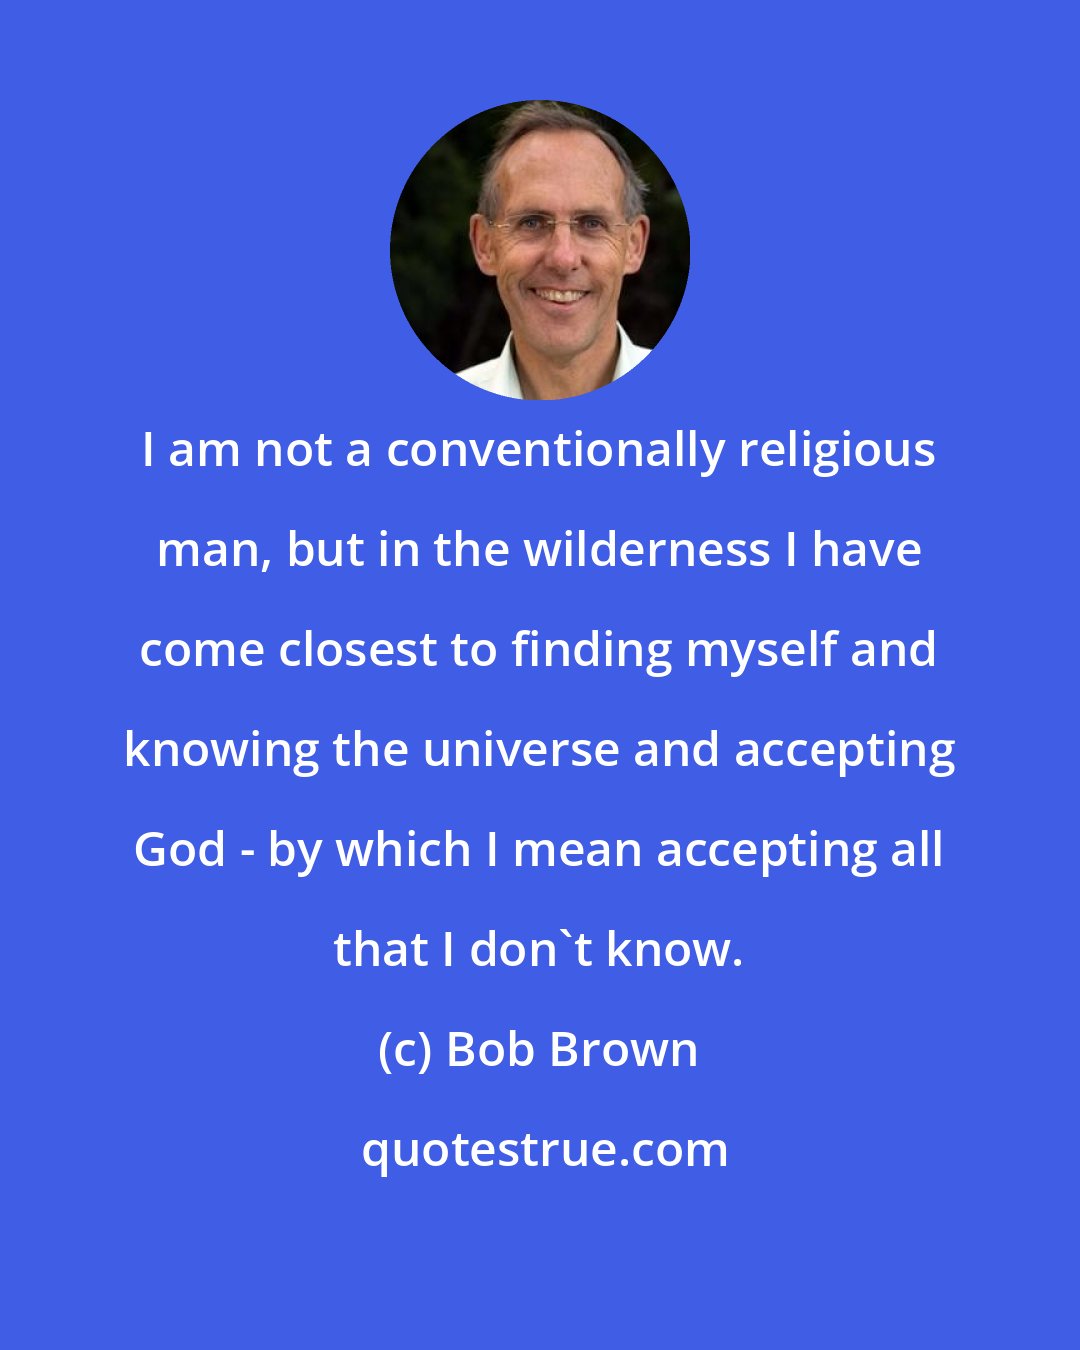 Bob Brown: I am not a conventionally religious man, but in the wilderness I have come closest to finding myself and knowing the universe and accepting God - by which I mean accepting all that I don't know.